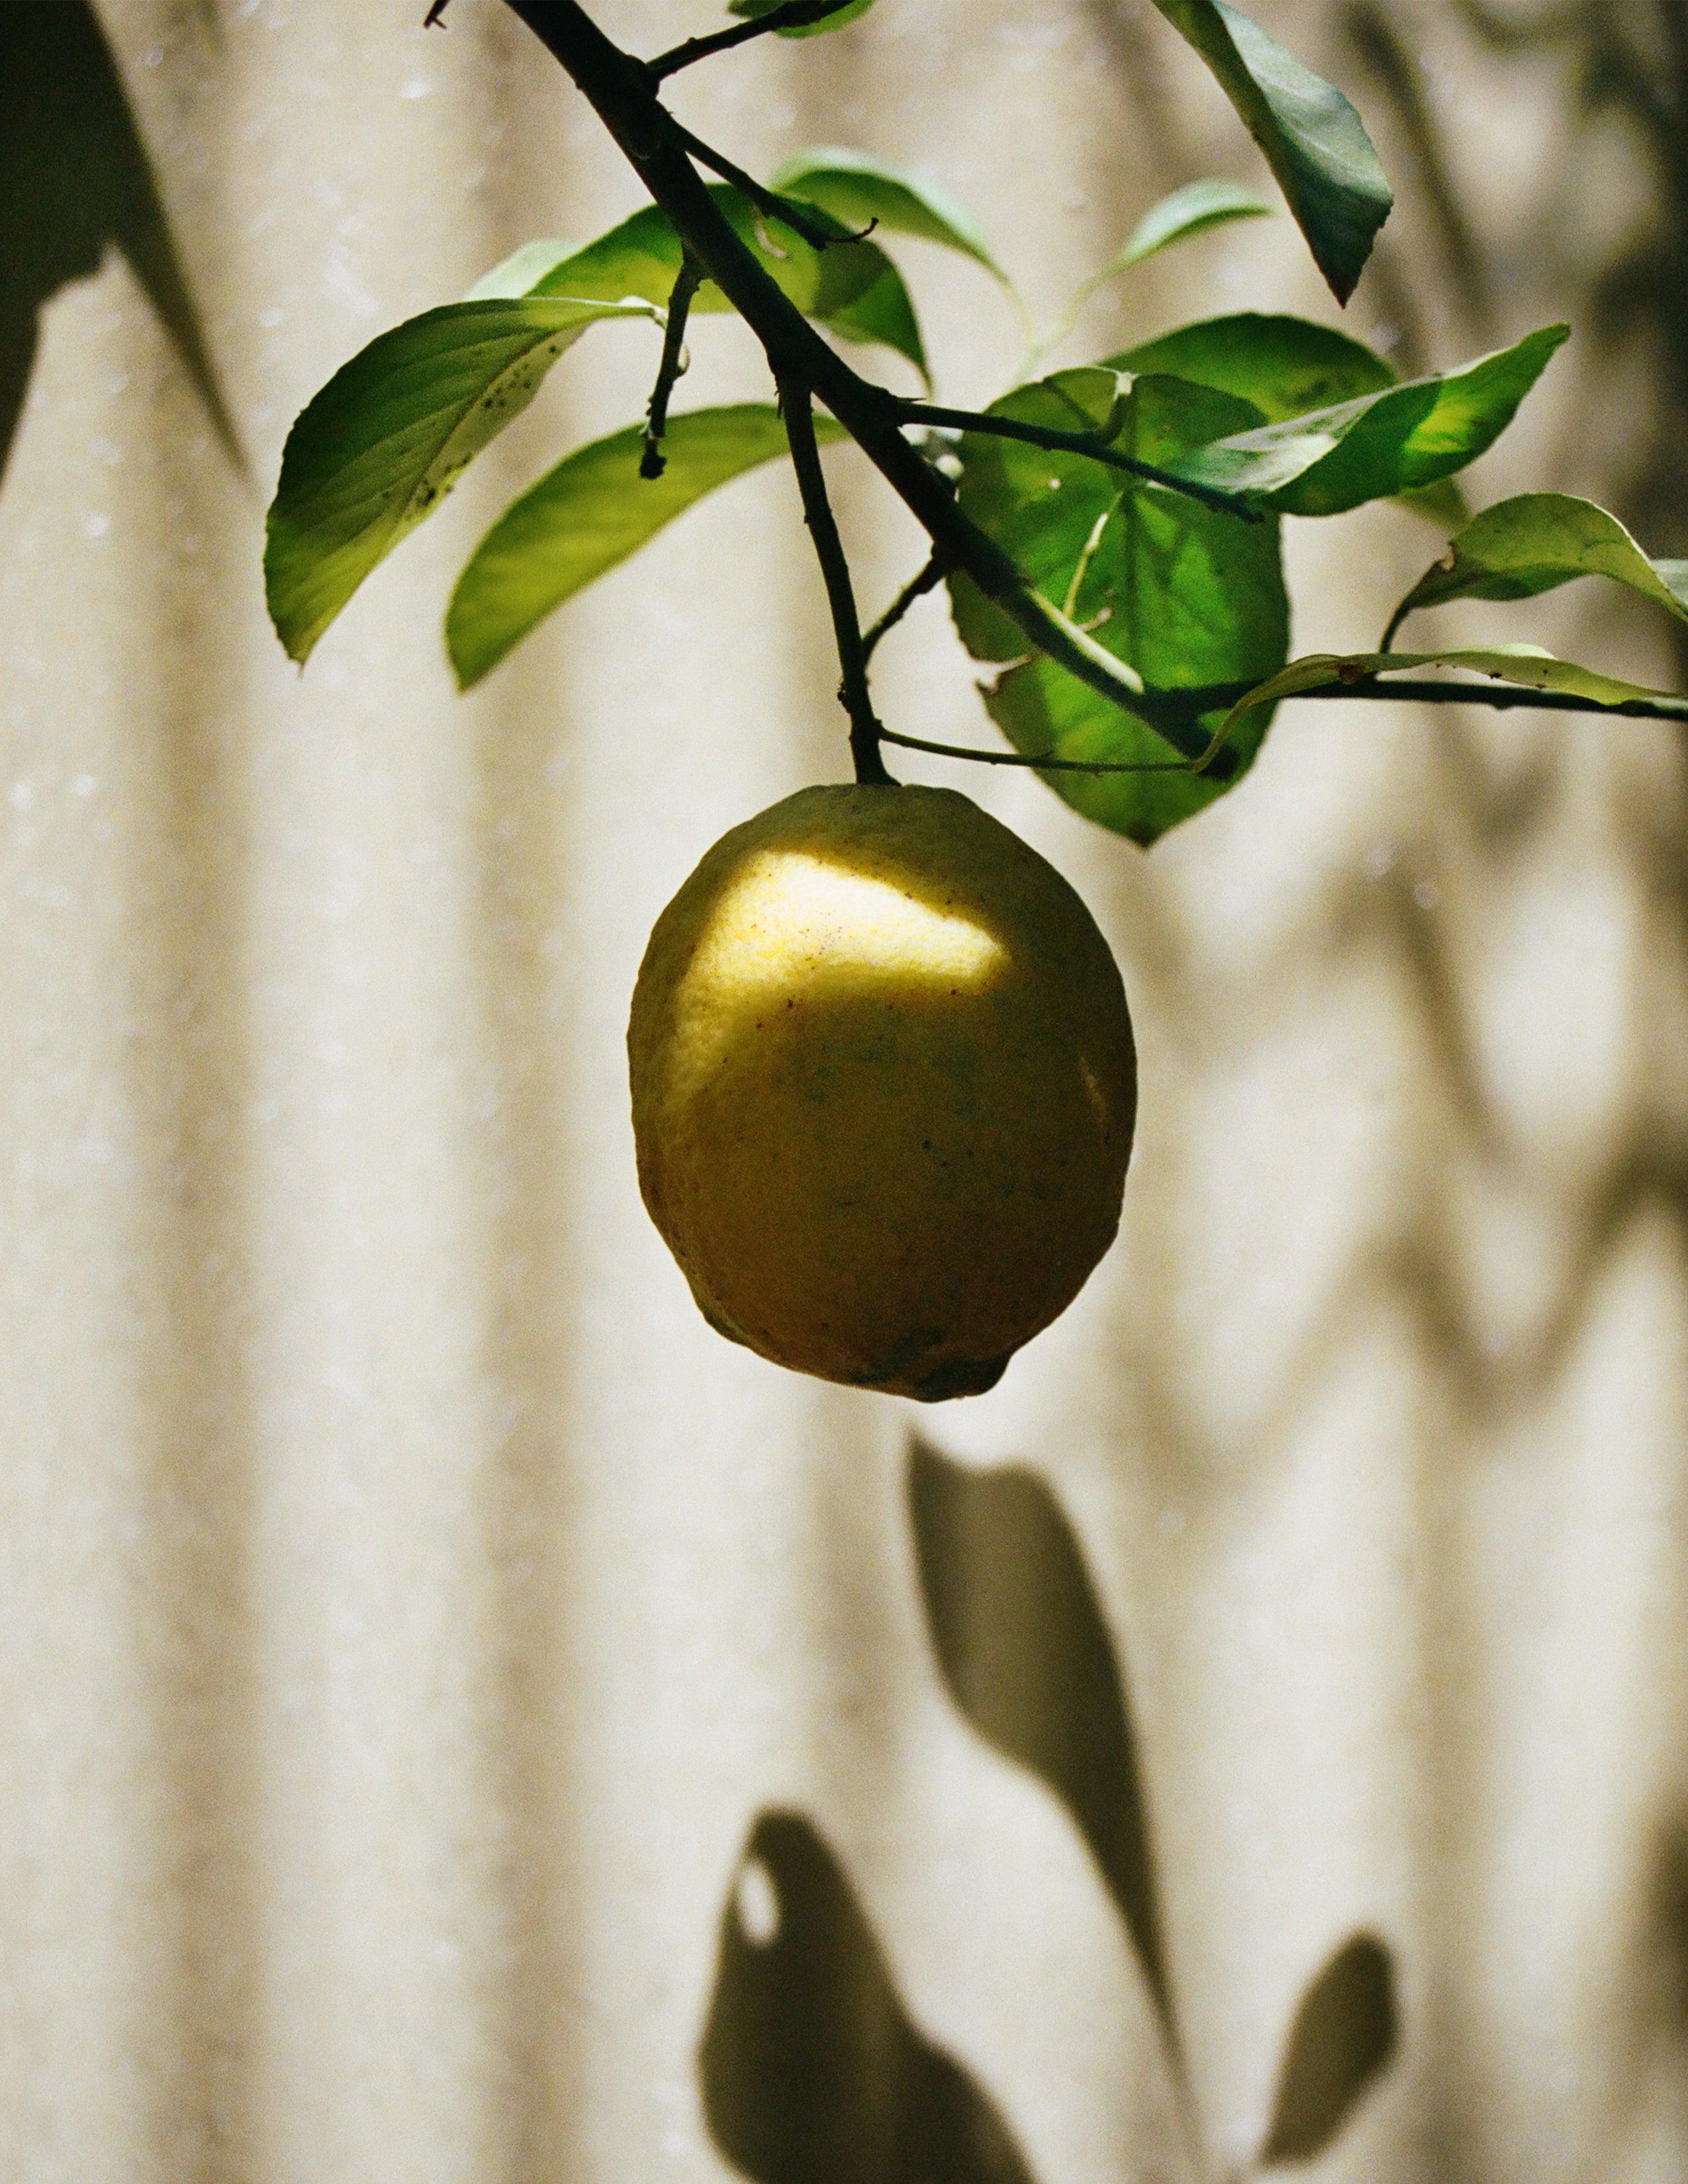 A lemon dangling down from the branch.